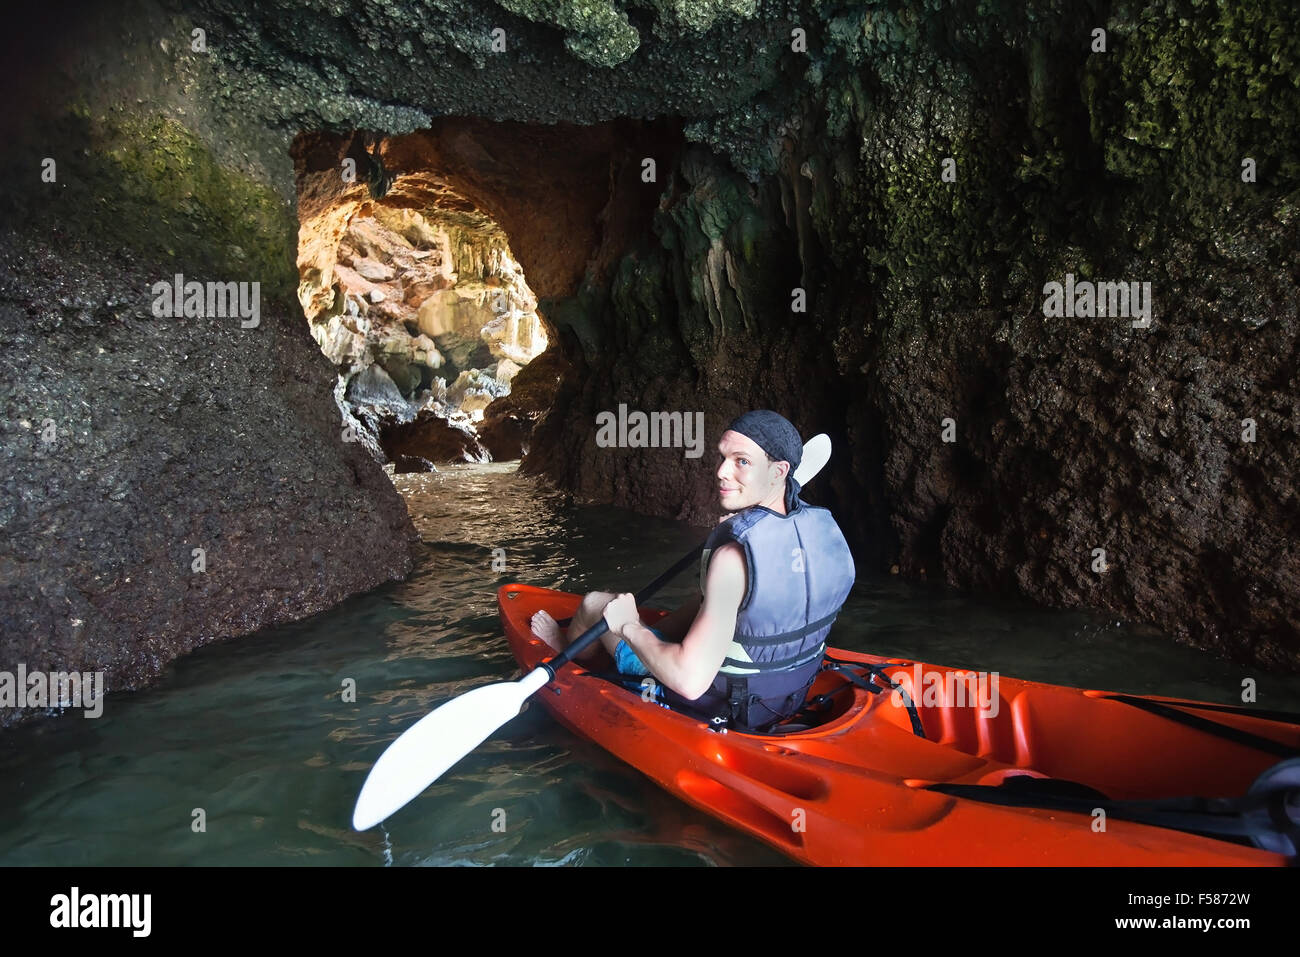 kayaking in the cave, outdoor extreme adventure Stock Photo